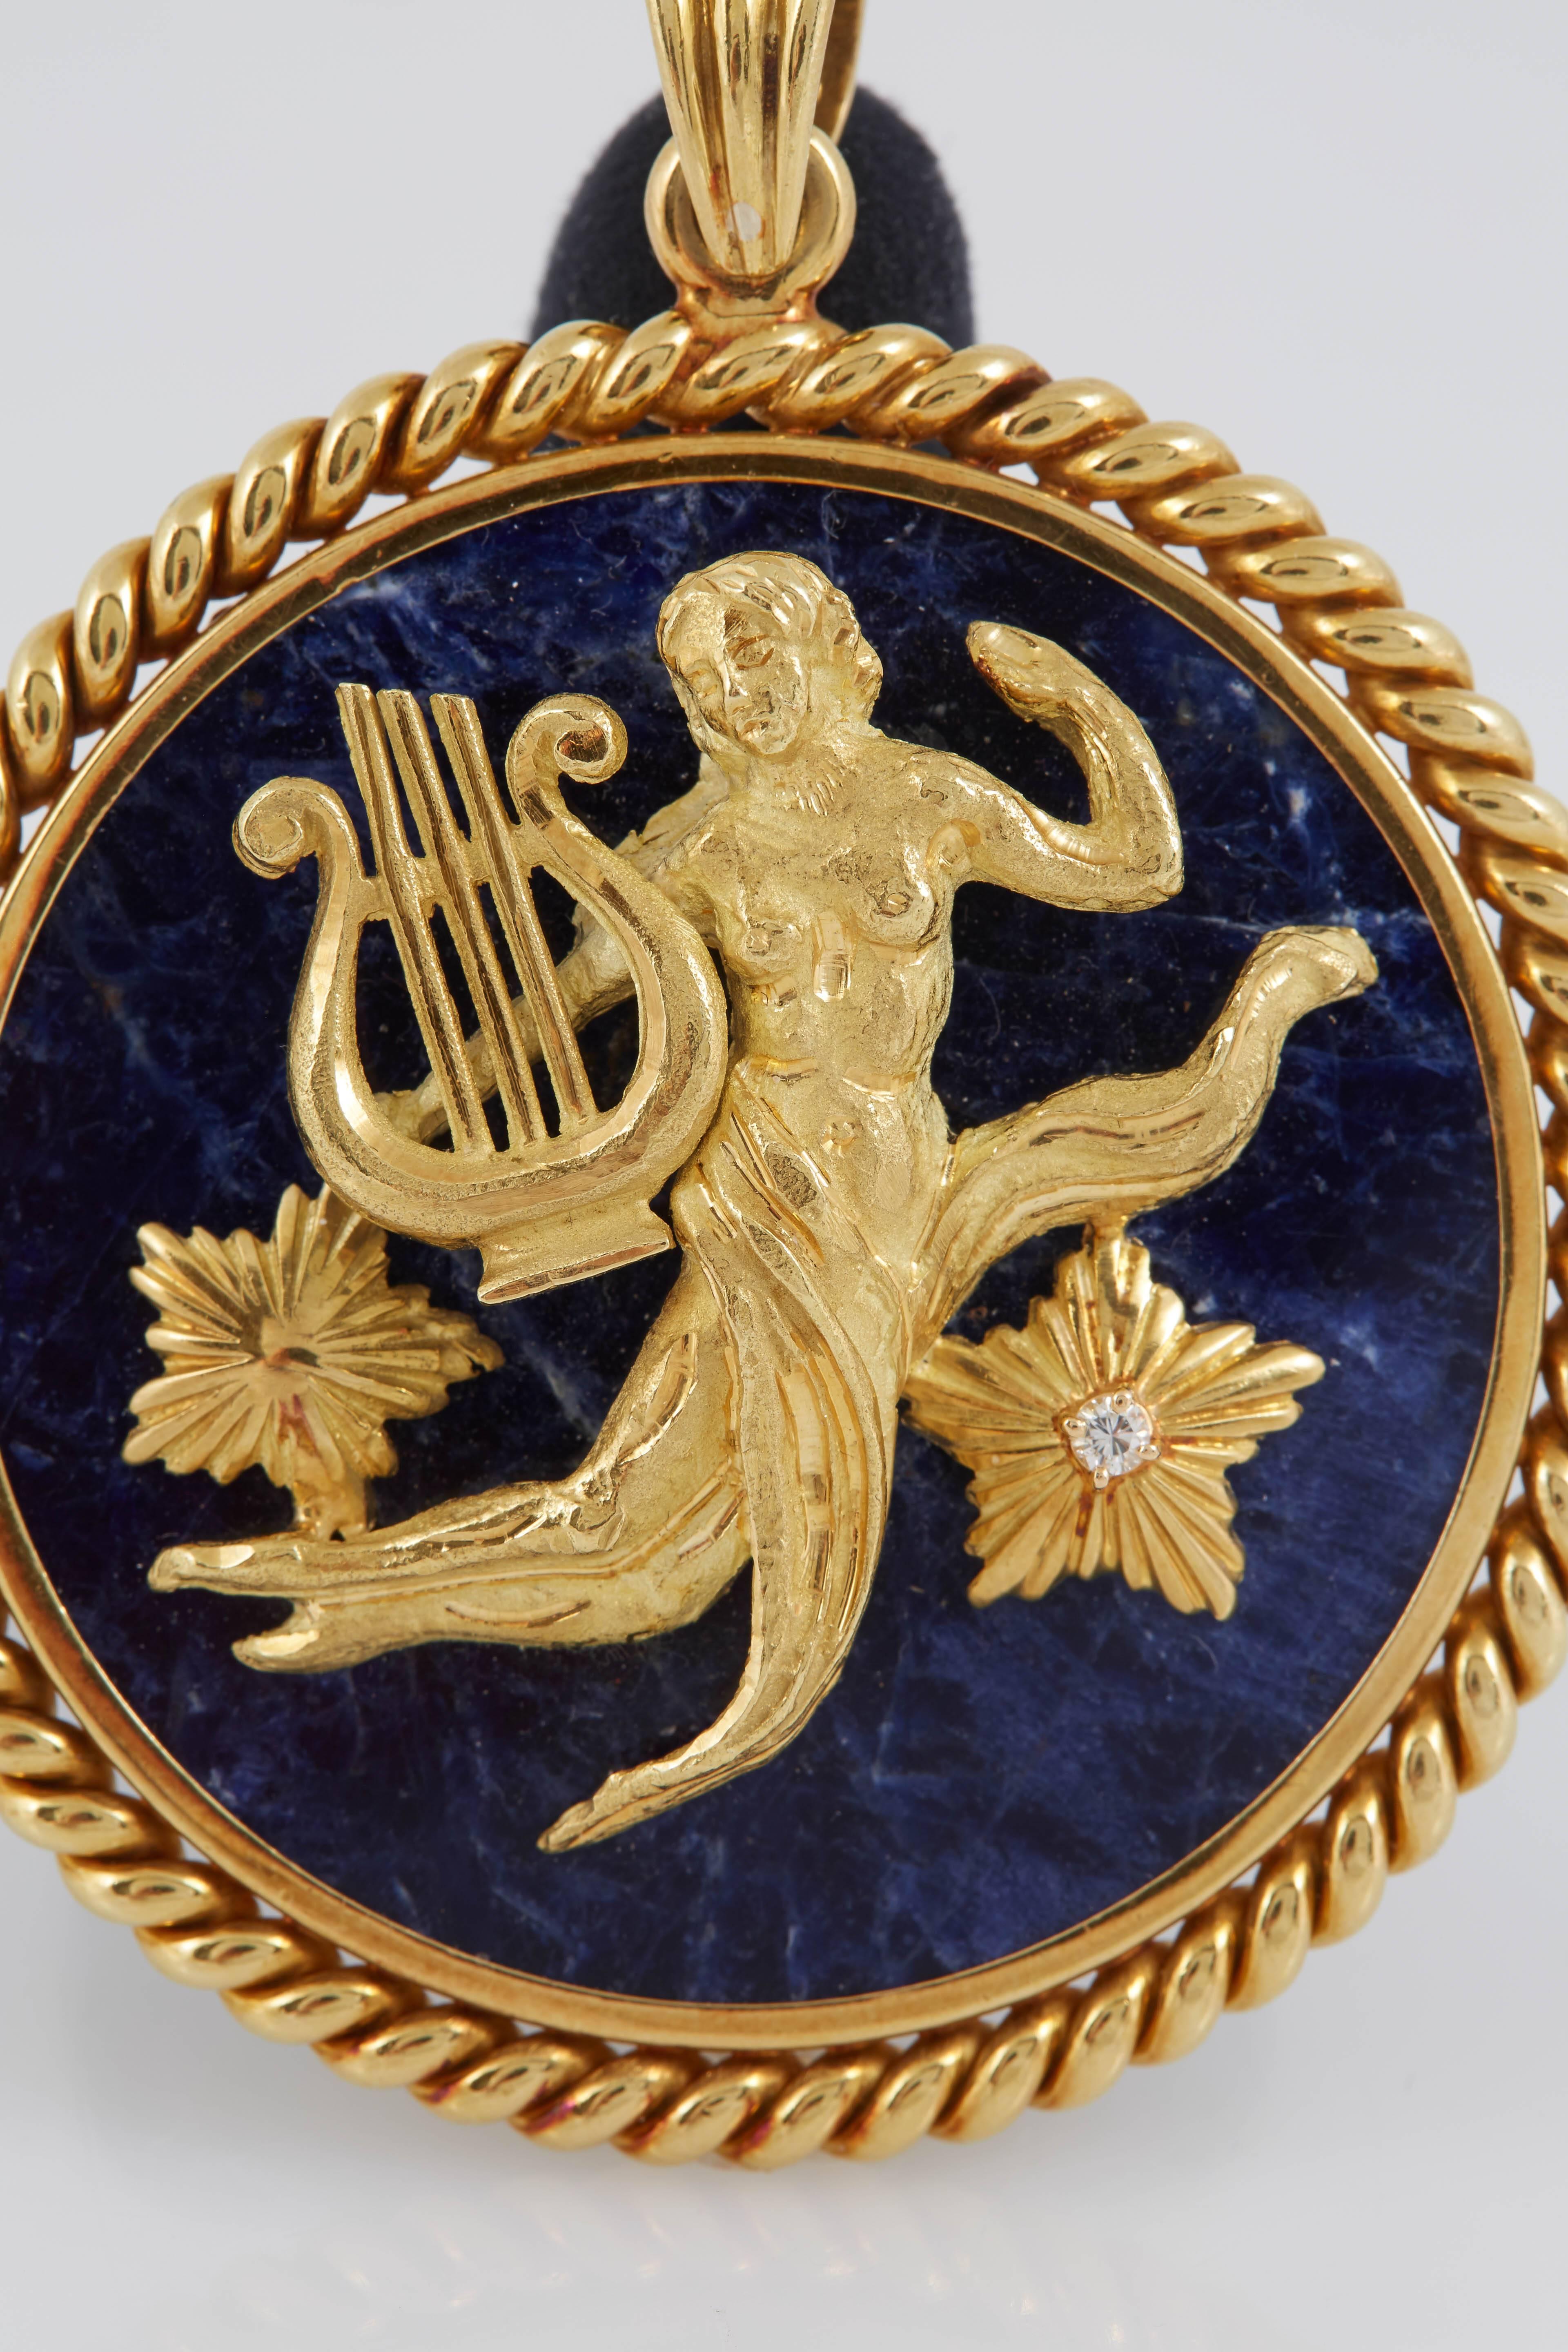 Signed Van Cleef & Arpels Virgo Zodiac Pendant.The Virgo figure at the center of the disc is made of 18K yellow gold and one of the stars is encrusted with a diamond at the center. The Lapis Lazuli disc is framed in 18K yellow gold as well. This